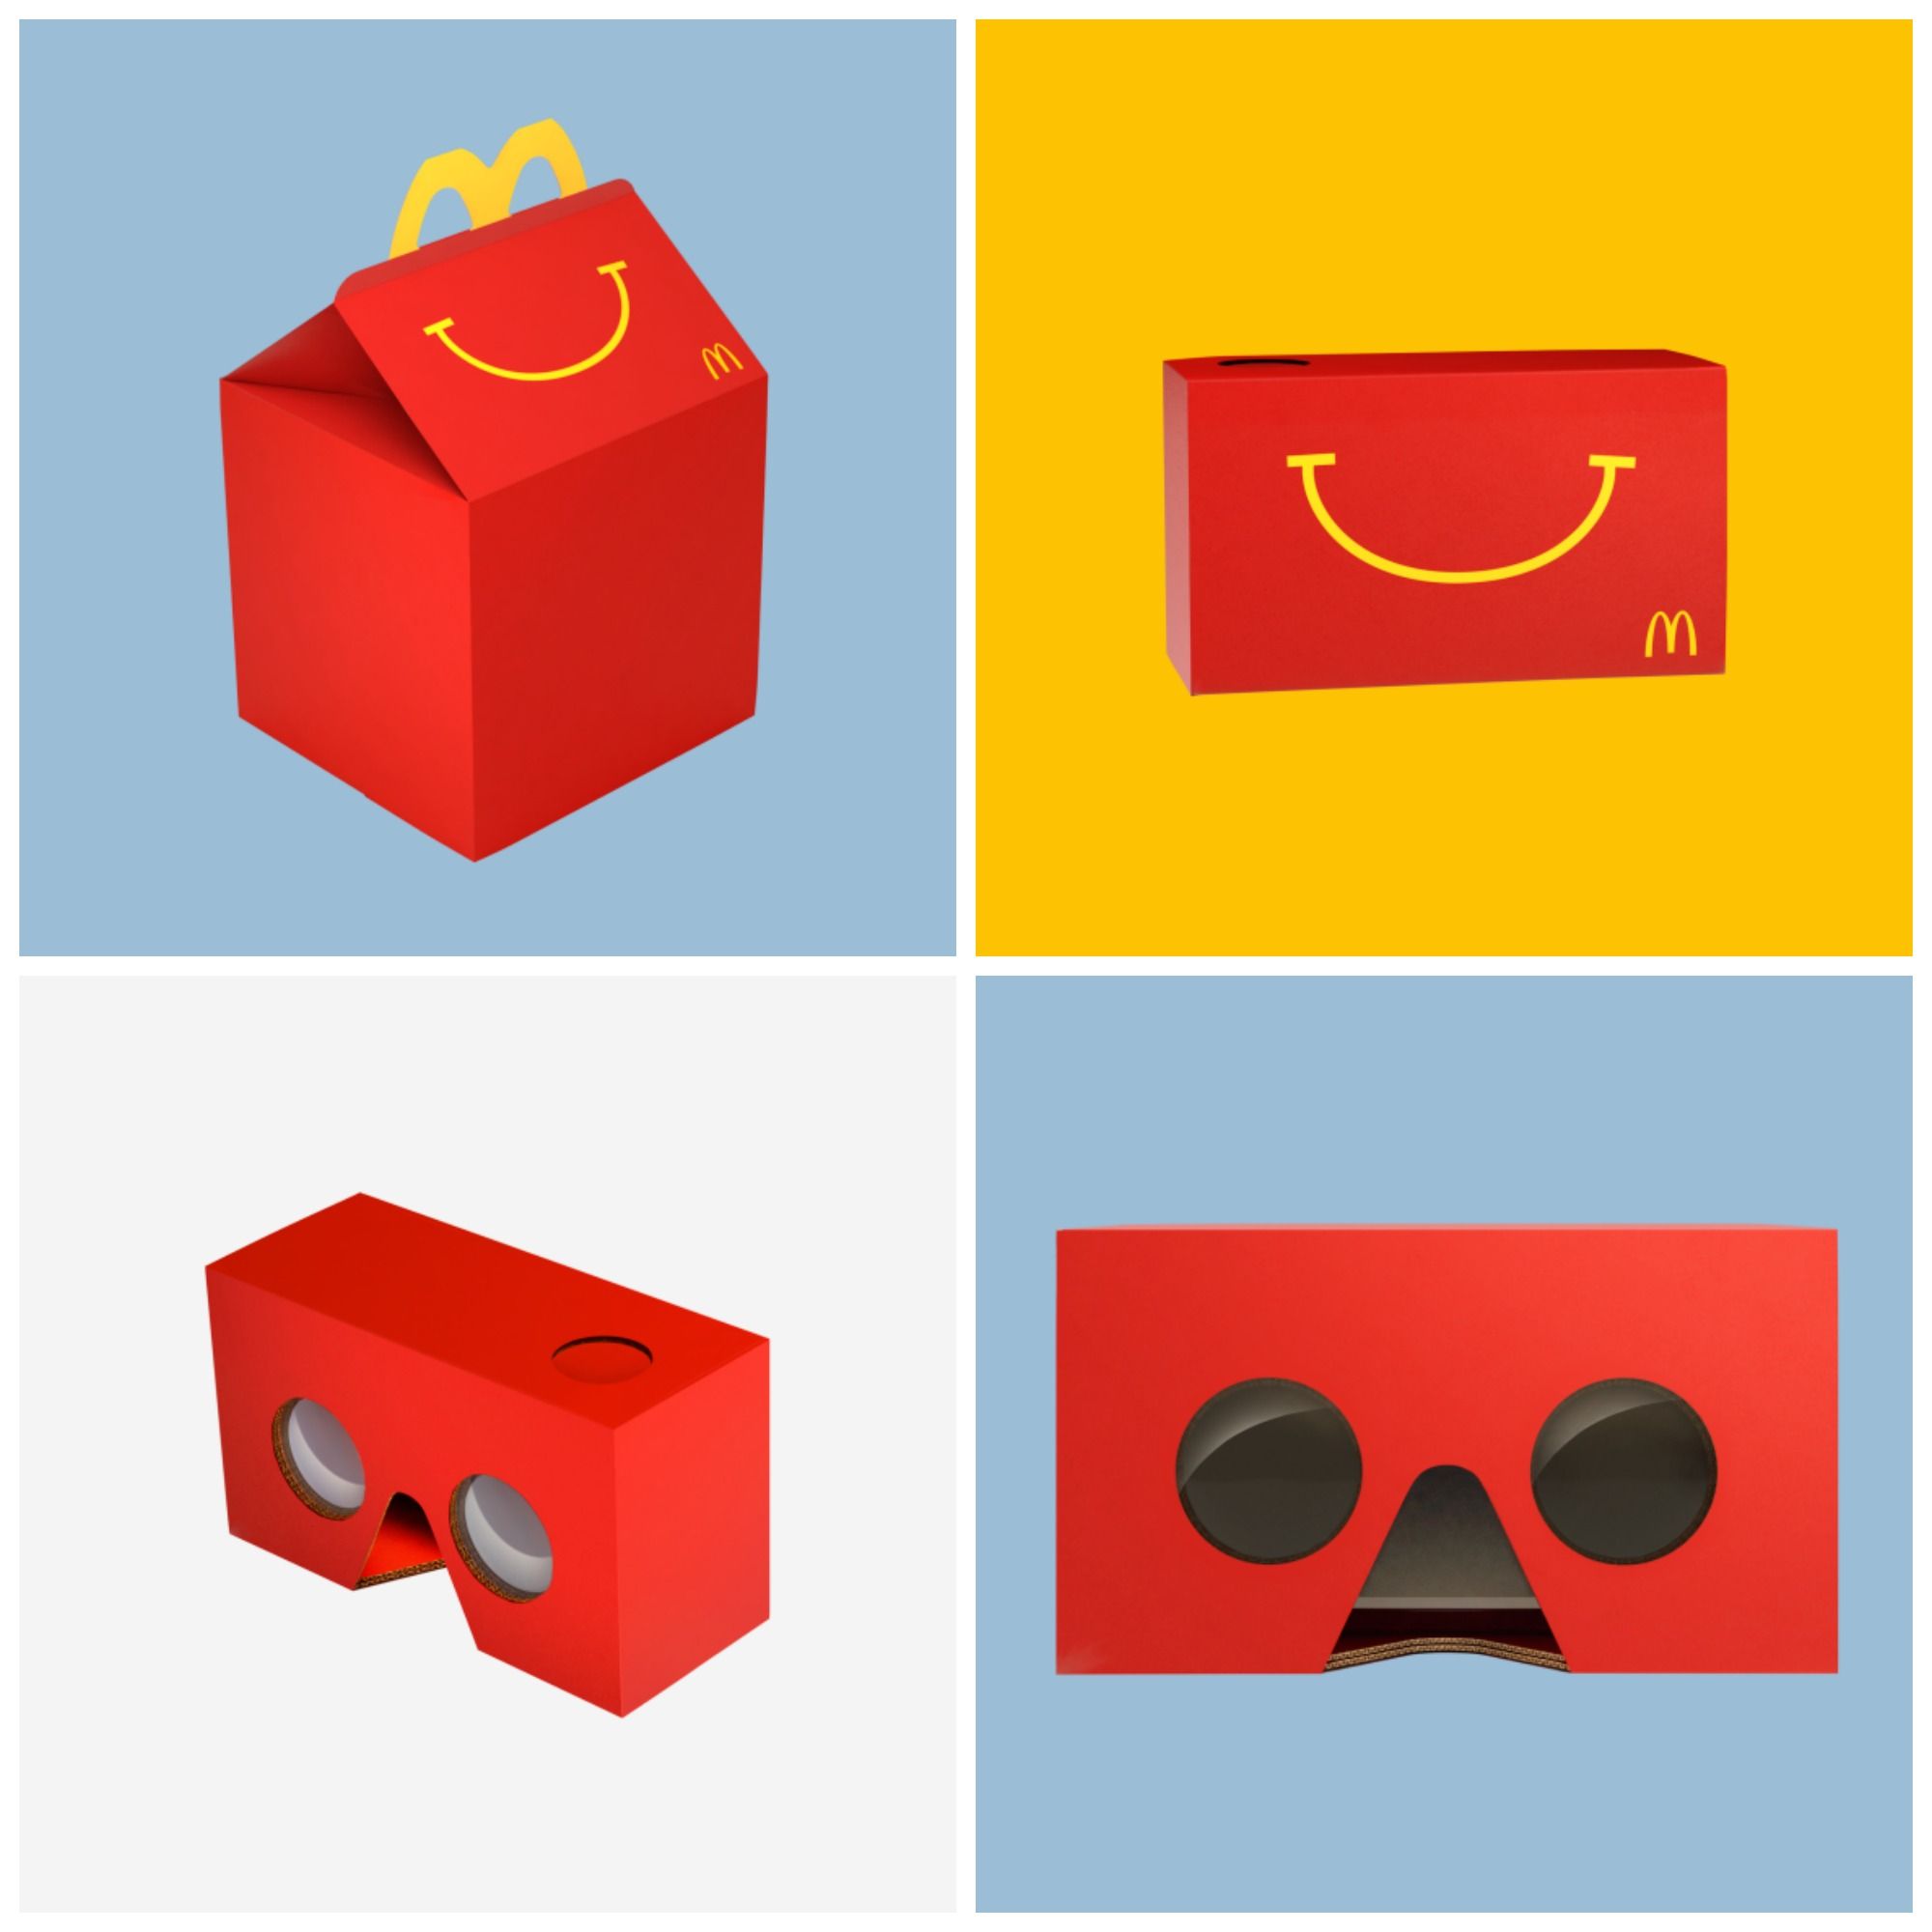 The Coolest McDonald's Happy Meal Toy is Now the Box Itself